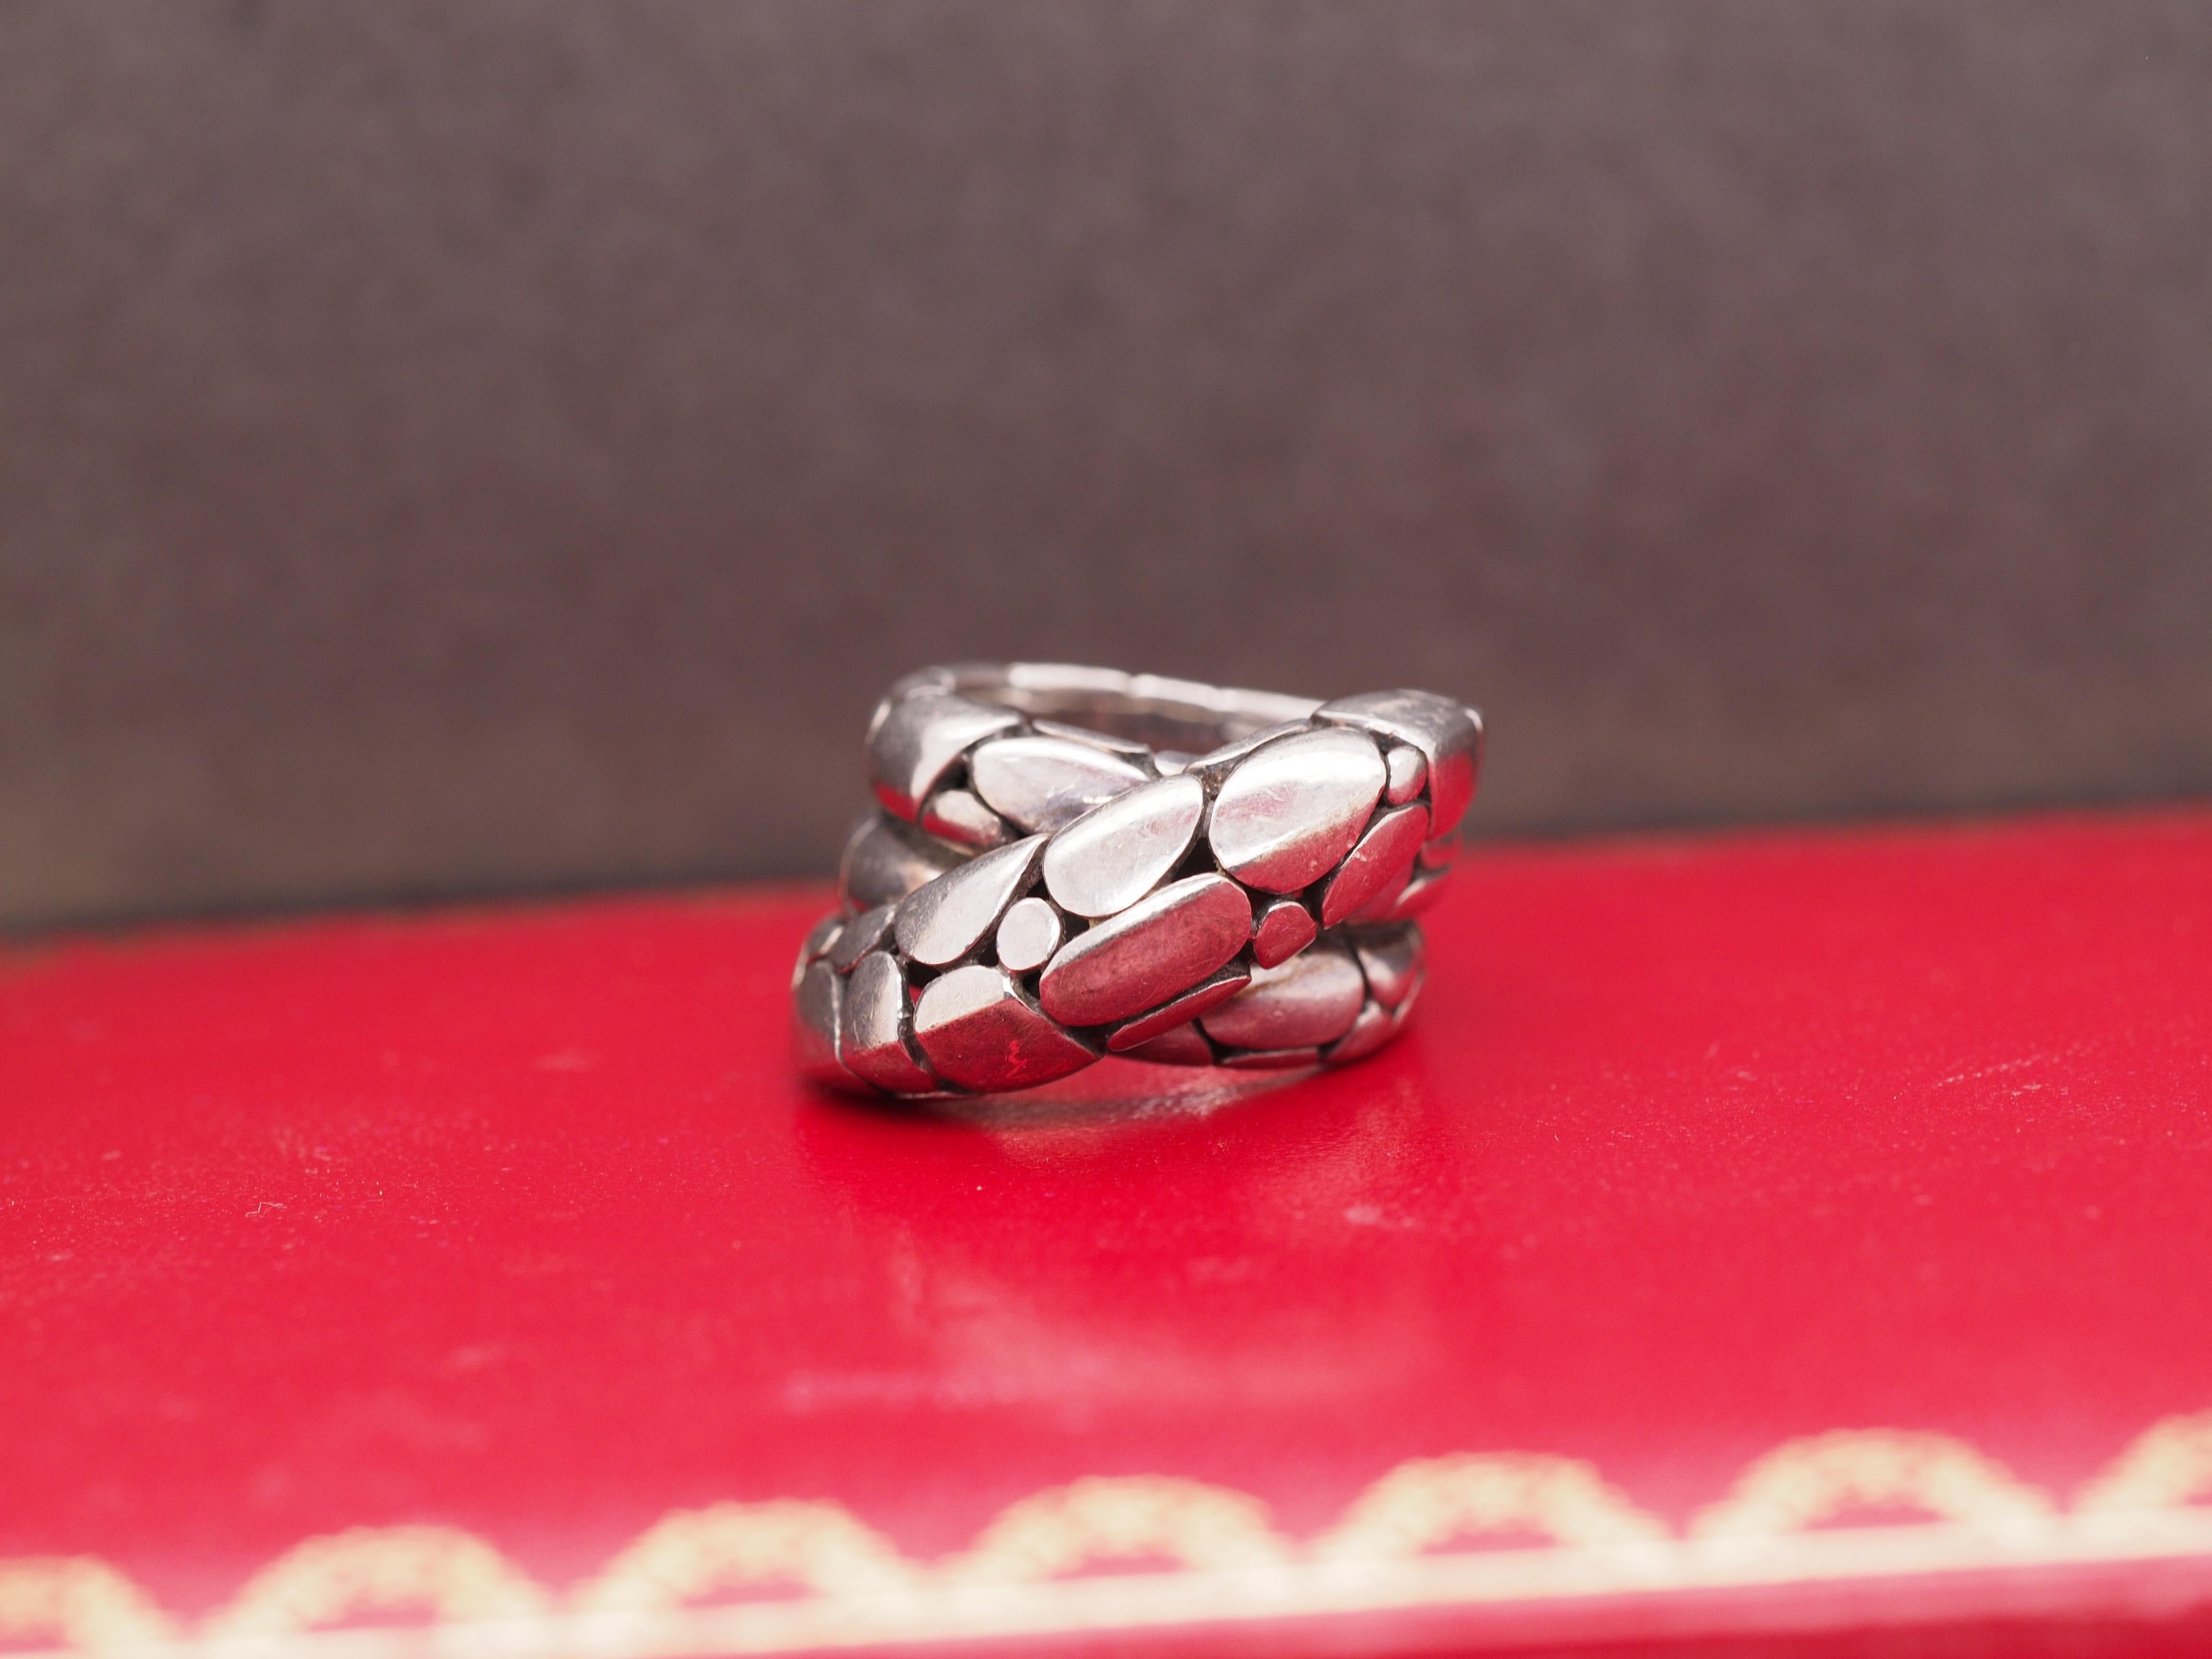 Year: 2000s
Item Details:
Ring Size: 7
Metal Type: Sterling Silver [Hallmarked, and Tested]
Weight: 17.5 grams
Band Width: 10mm
Condition: Excellent